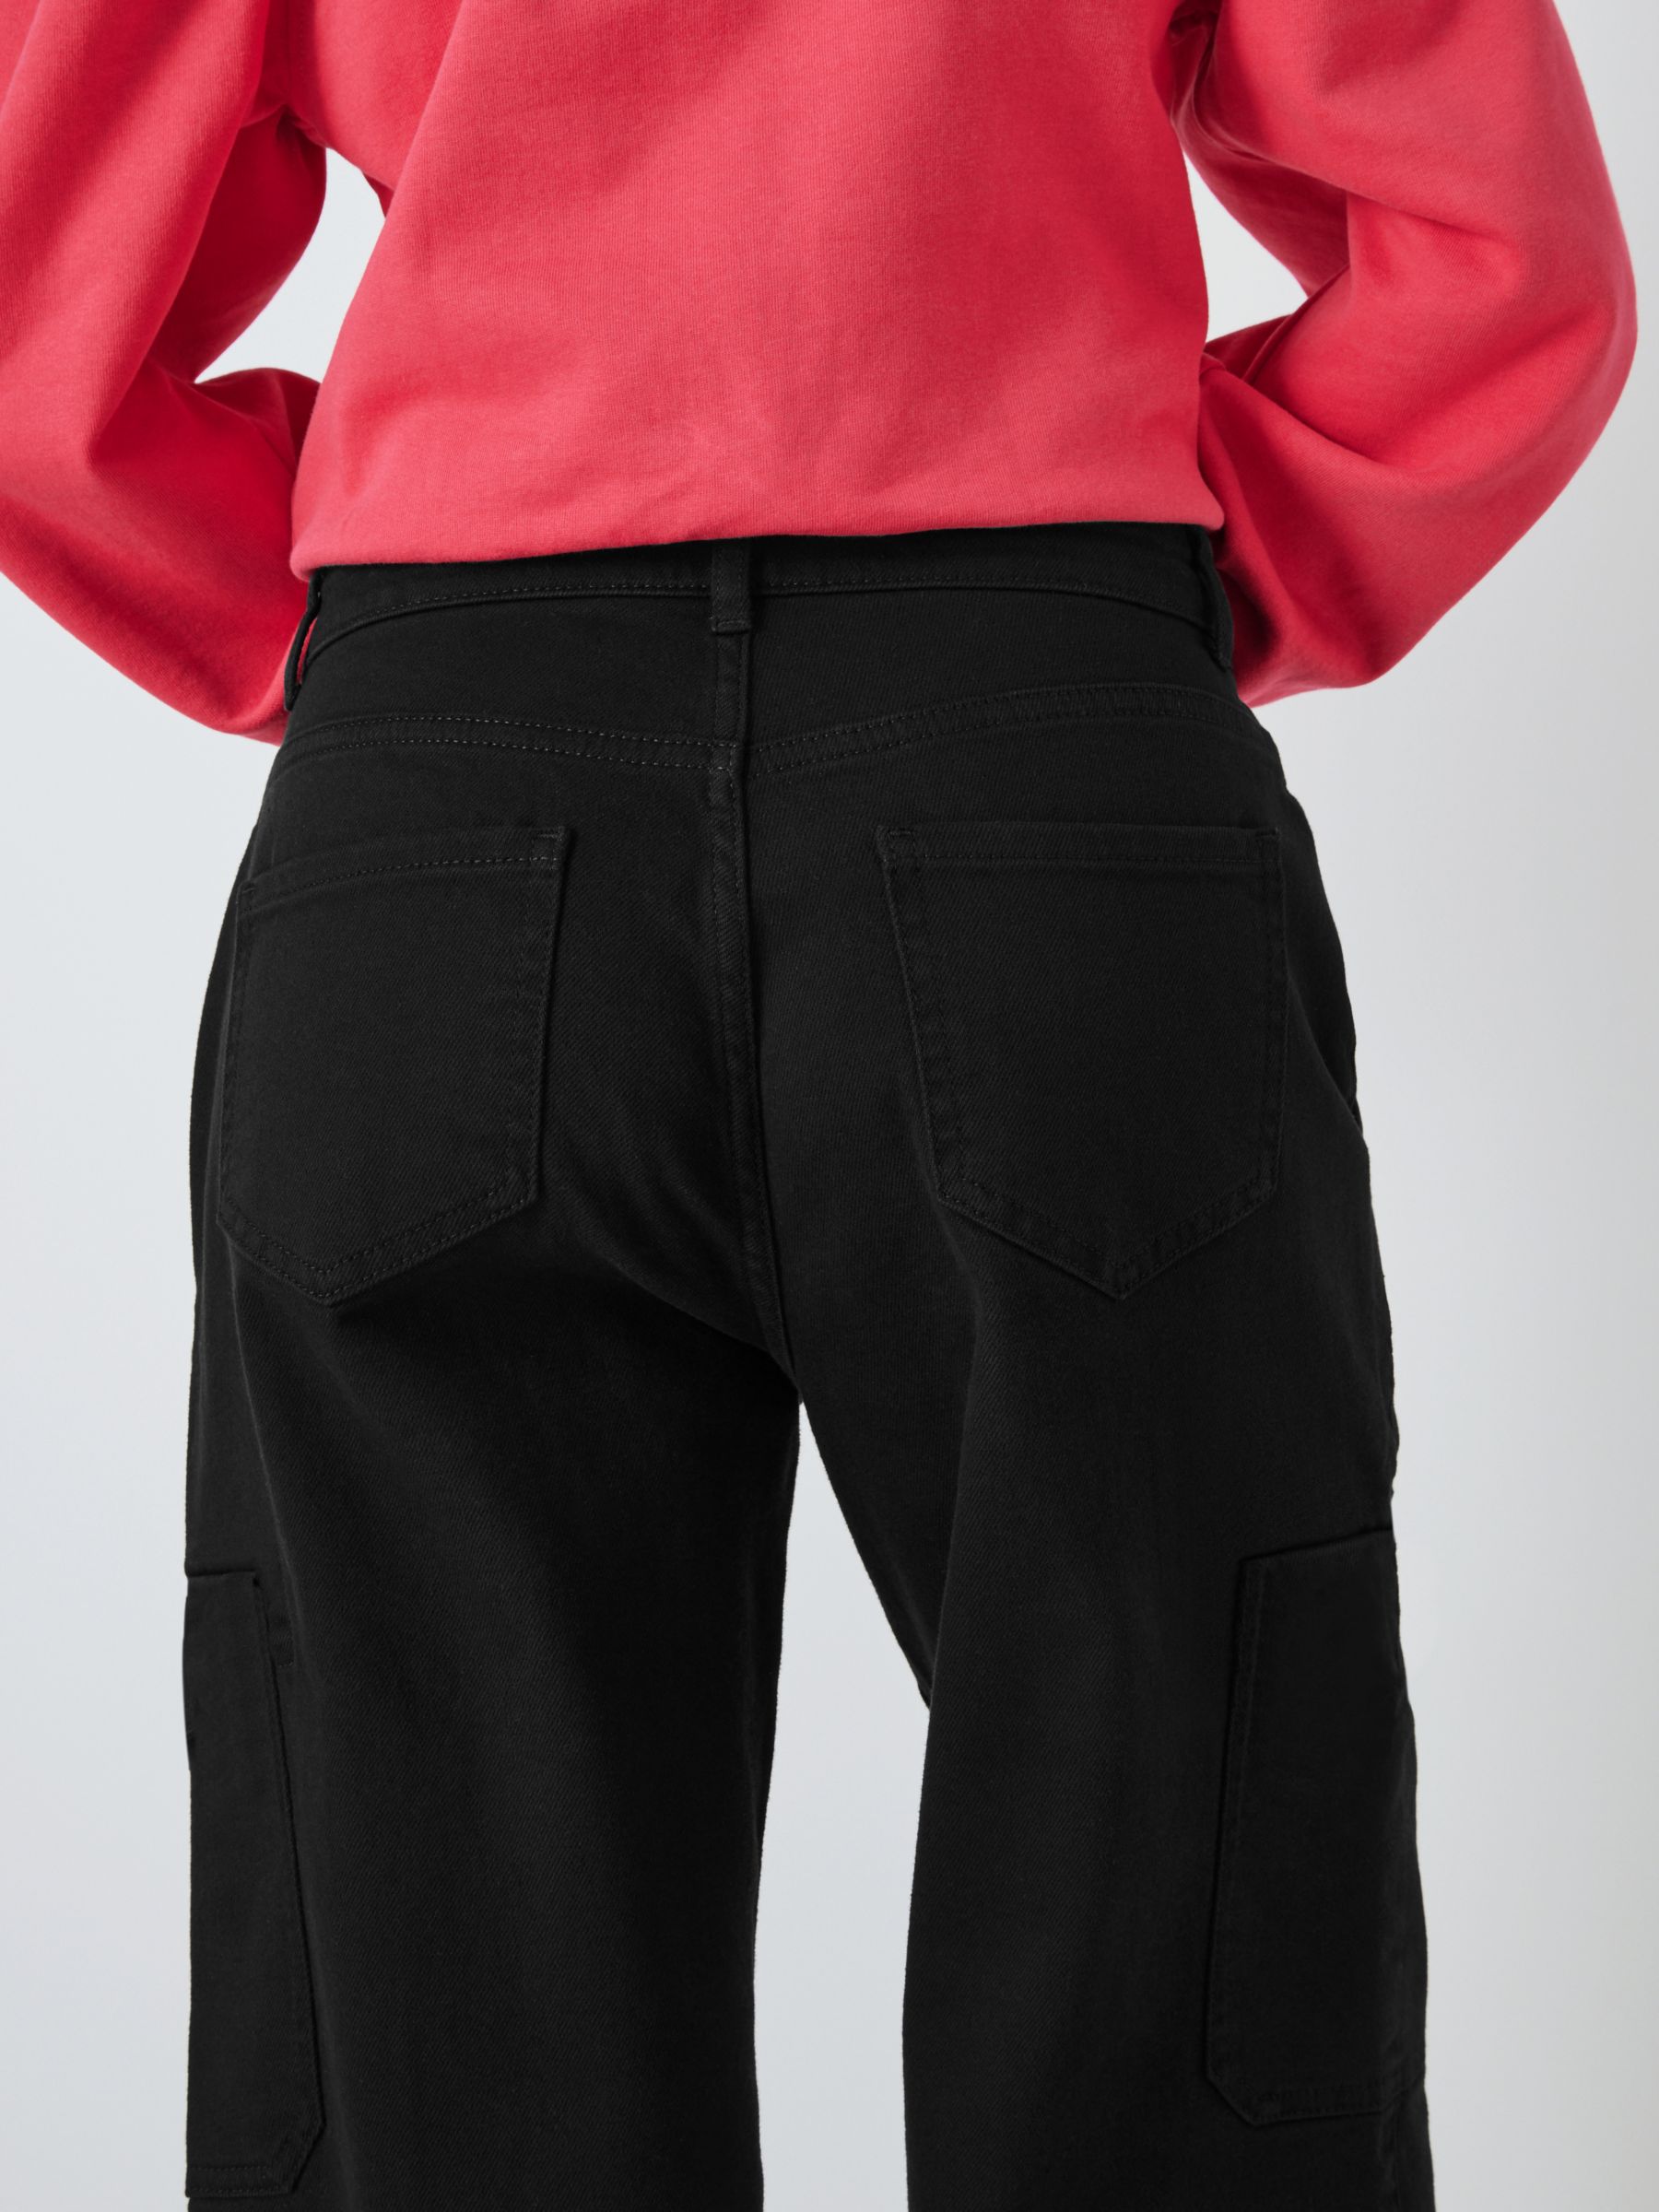 Buy John Lewis ANYDAY Wide Leg Cargo Trousers, Black Online at johnlewis.com